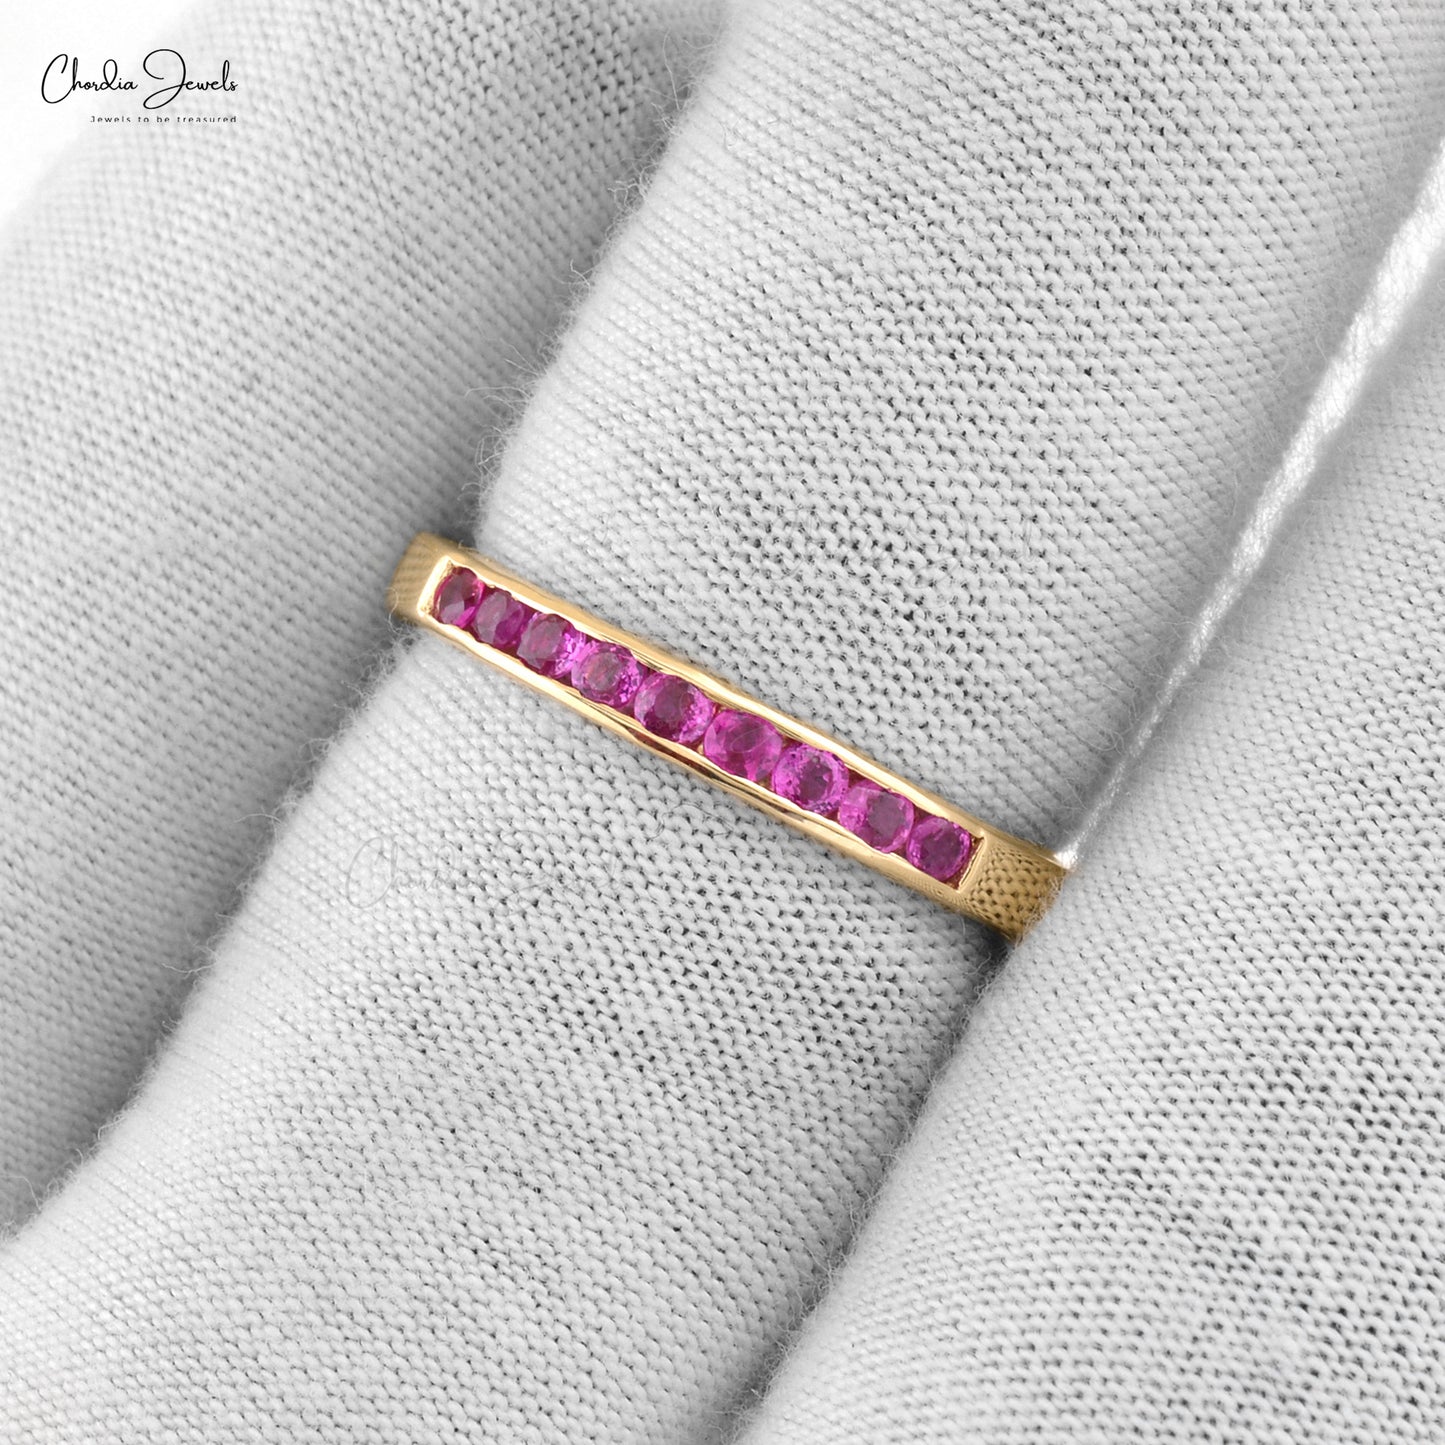 2mm Round Cut Ruby Gemstone Band For Women in 14k Solid Yellow Gold, July Birthstone Gemstone Eternity Ring Gift For Her